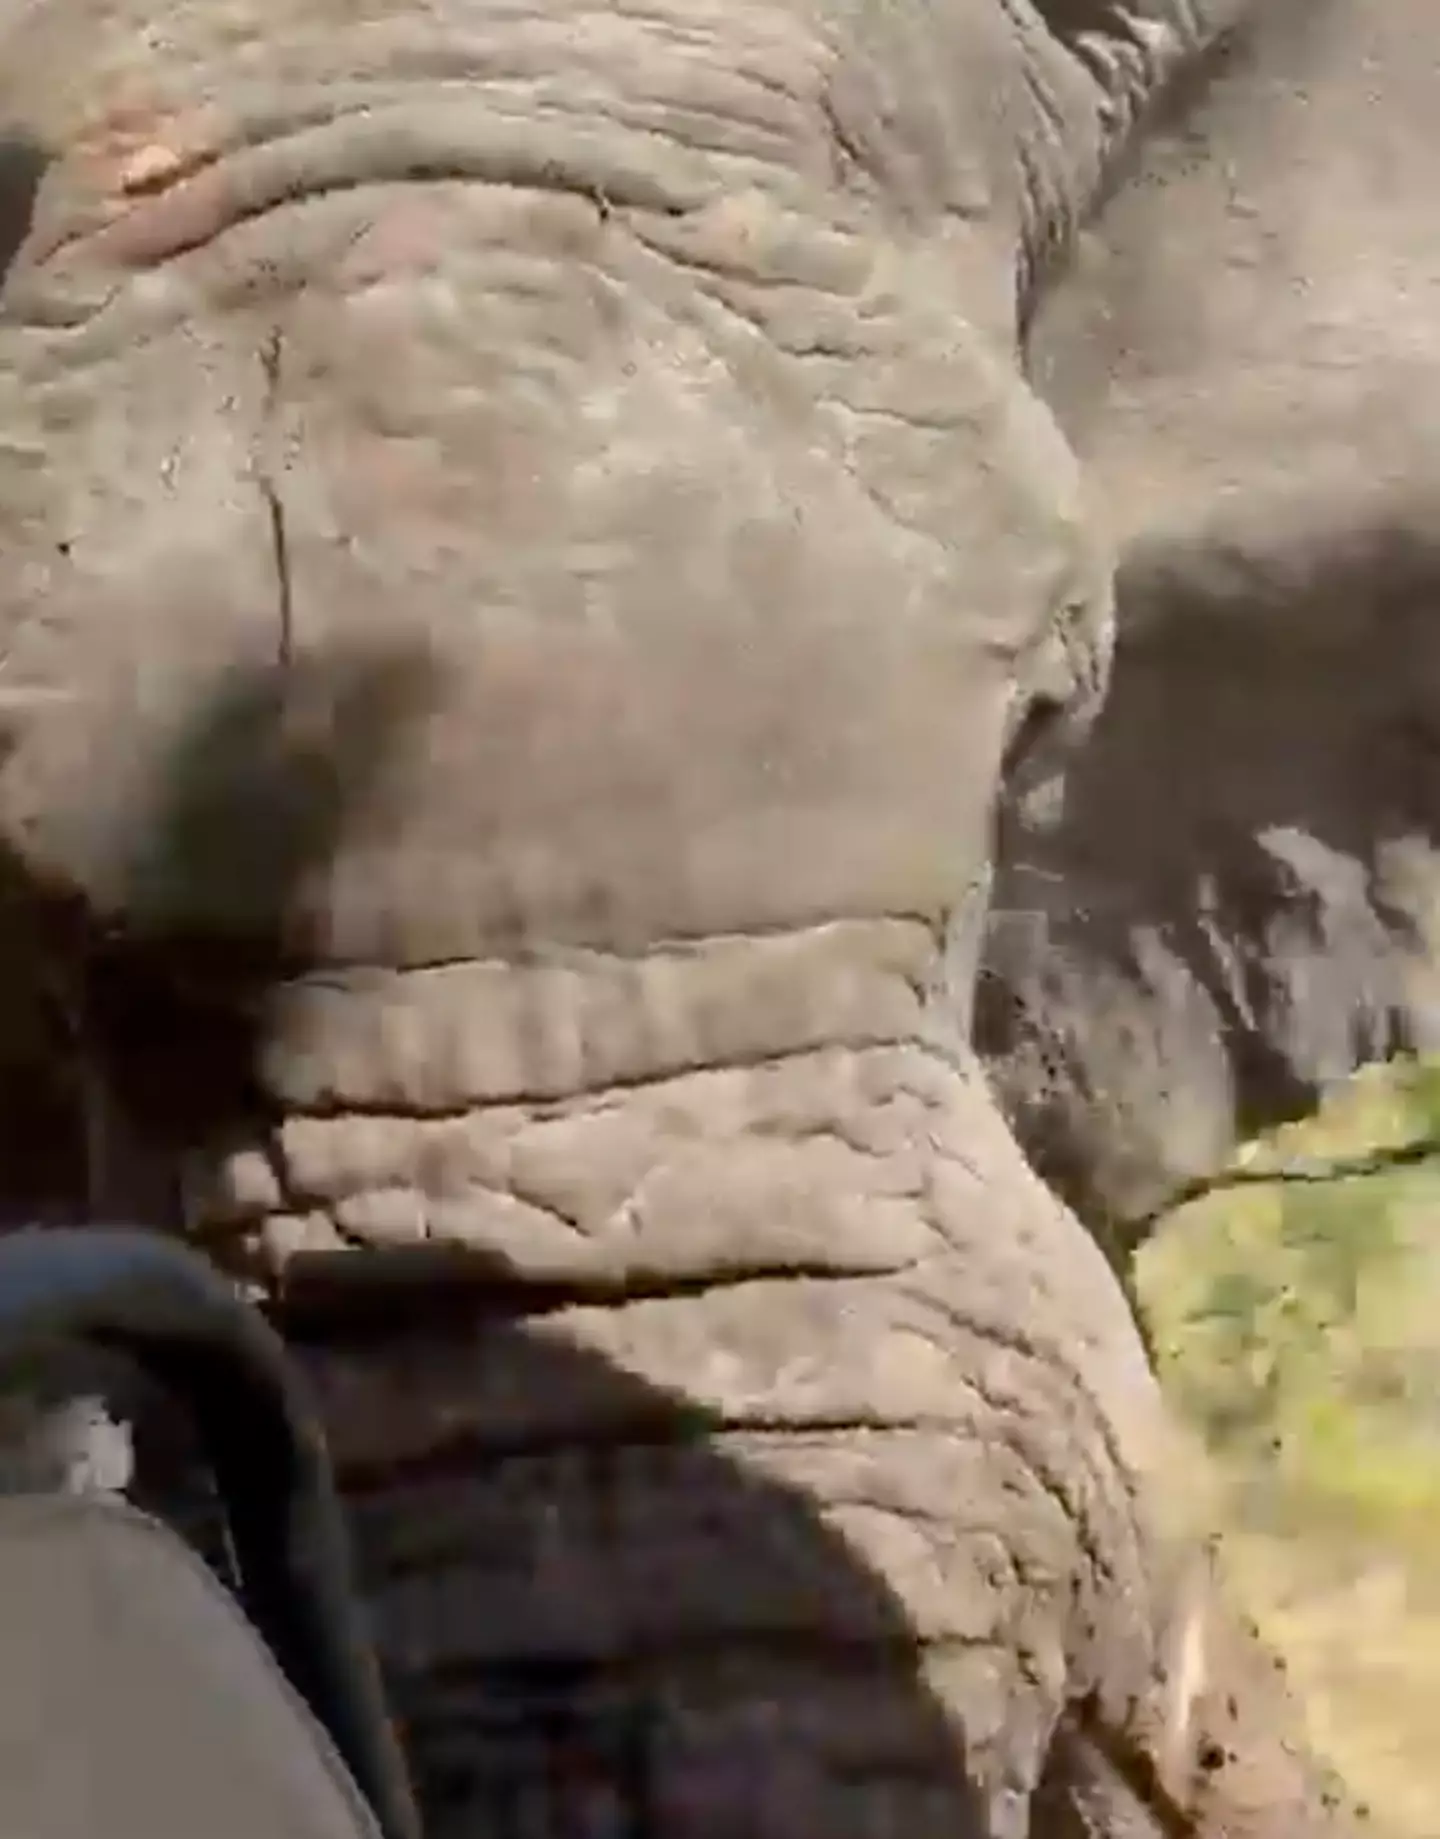 The elephant quickly approached the vehicle.